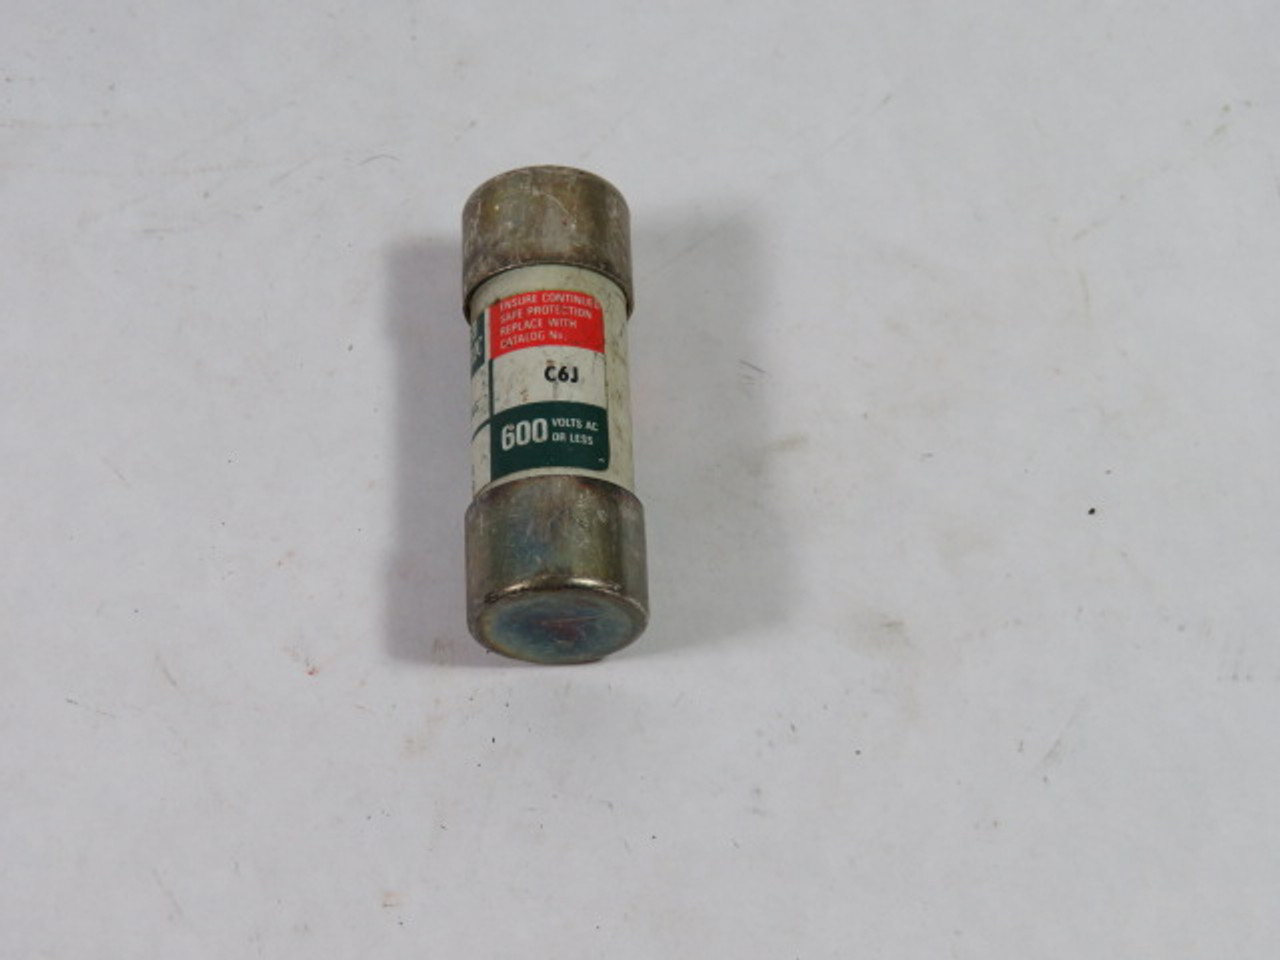 English Electric C6J Current Limiting Fuse 6A 600V USED